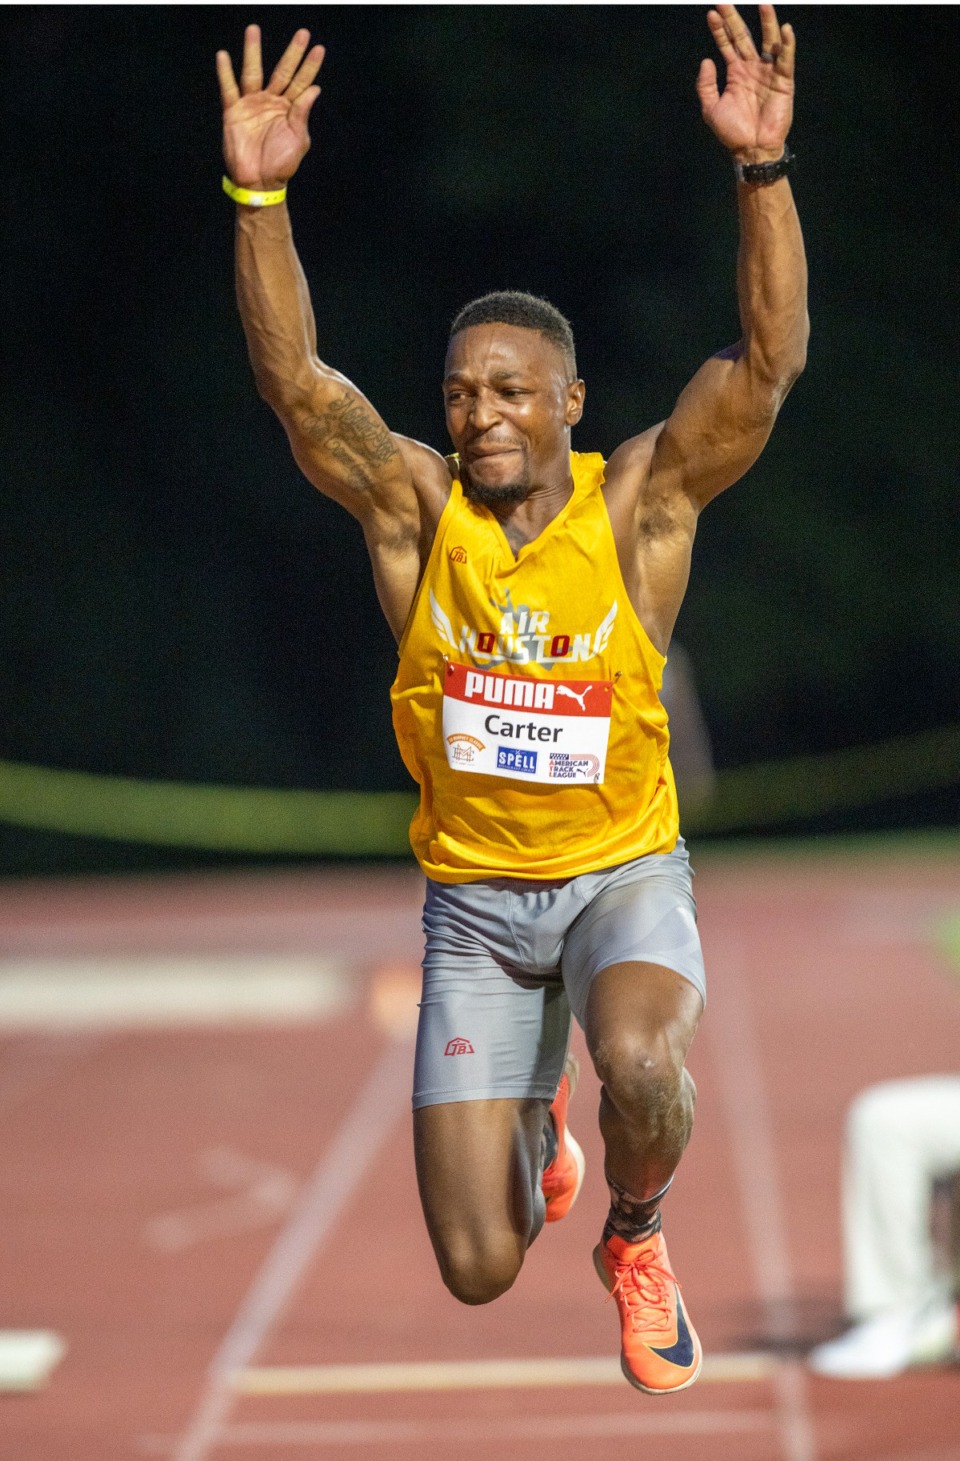 <strong>Chris Carter places second in the men's pro triple jump at the Ed Murphey Classic track meet at the University of Memphis South Campus, Friday, July 29. 2022.</strong>&nbsp;(Greg Campbell/Special to The Daily Memphian)